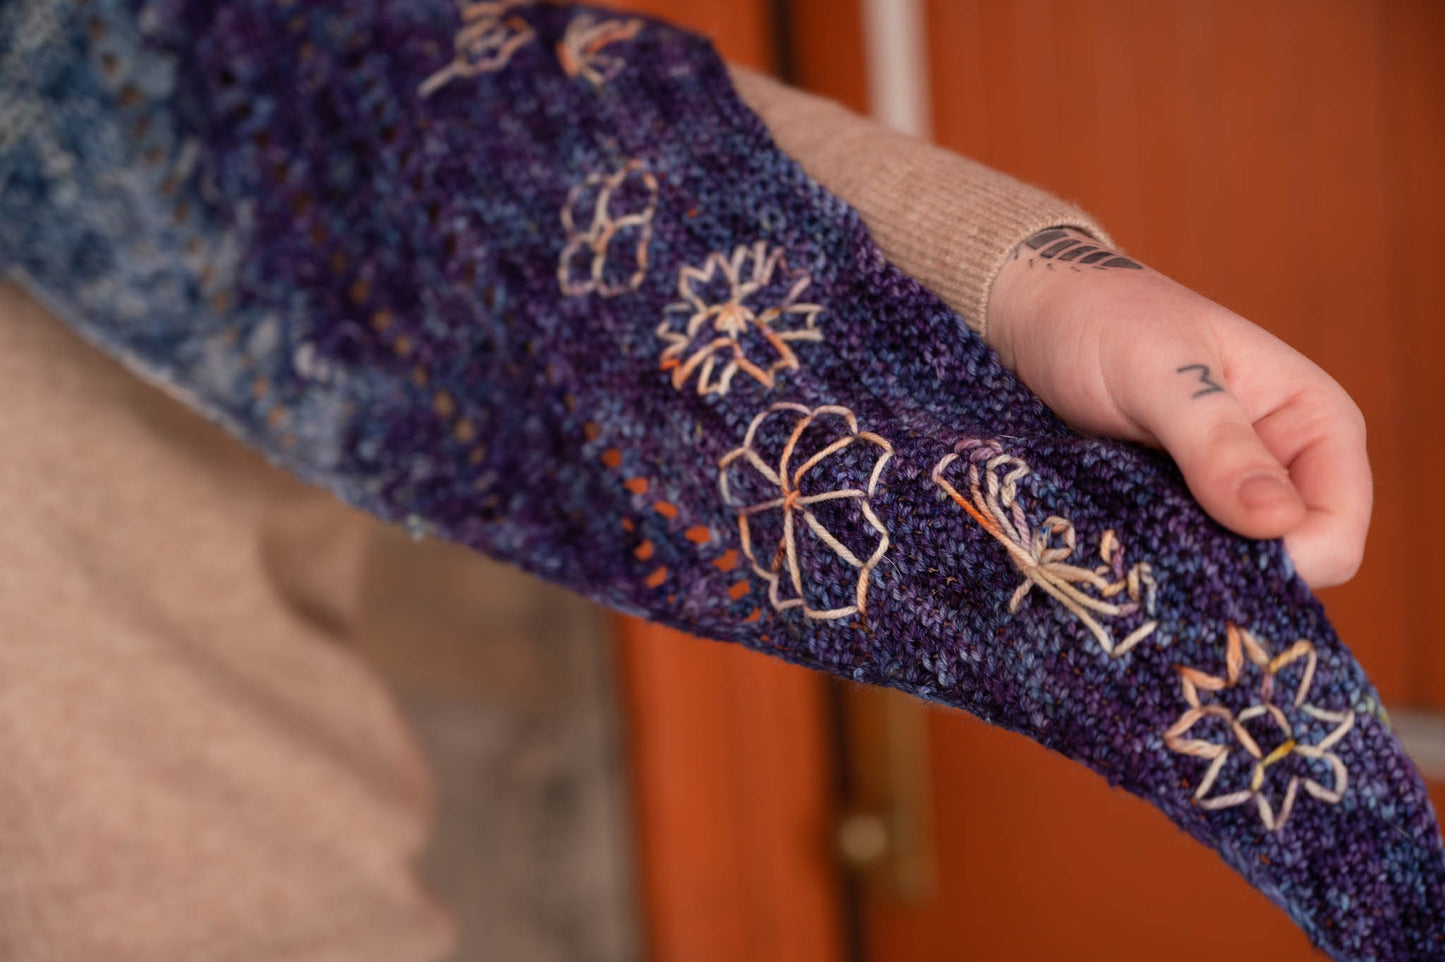 The embroidered edge of the Replenishment crochet shawl, which is embroidered with a contrasting color of yarn in various flower-inspired motifs.